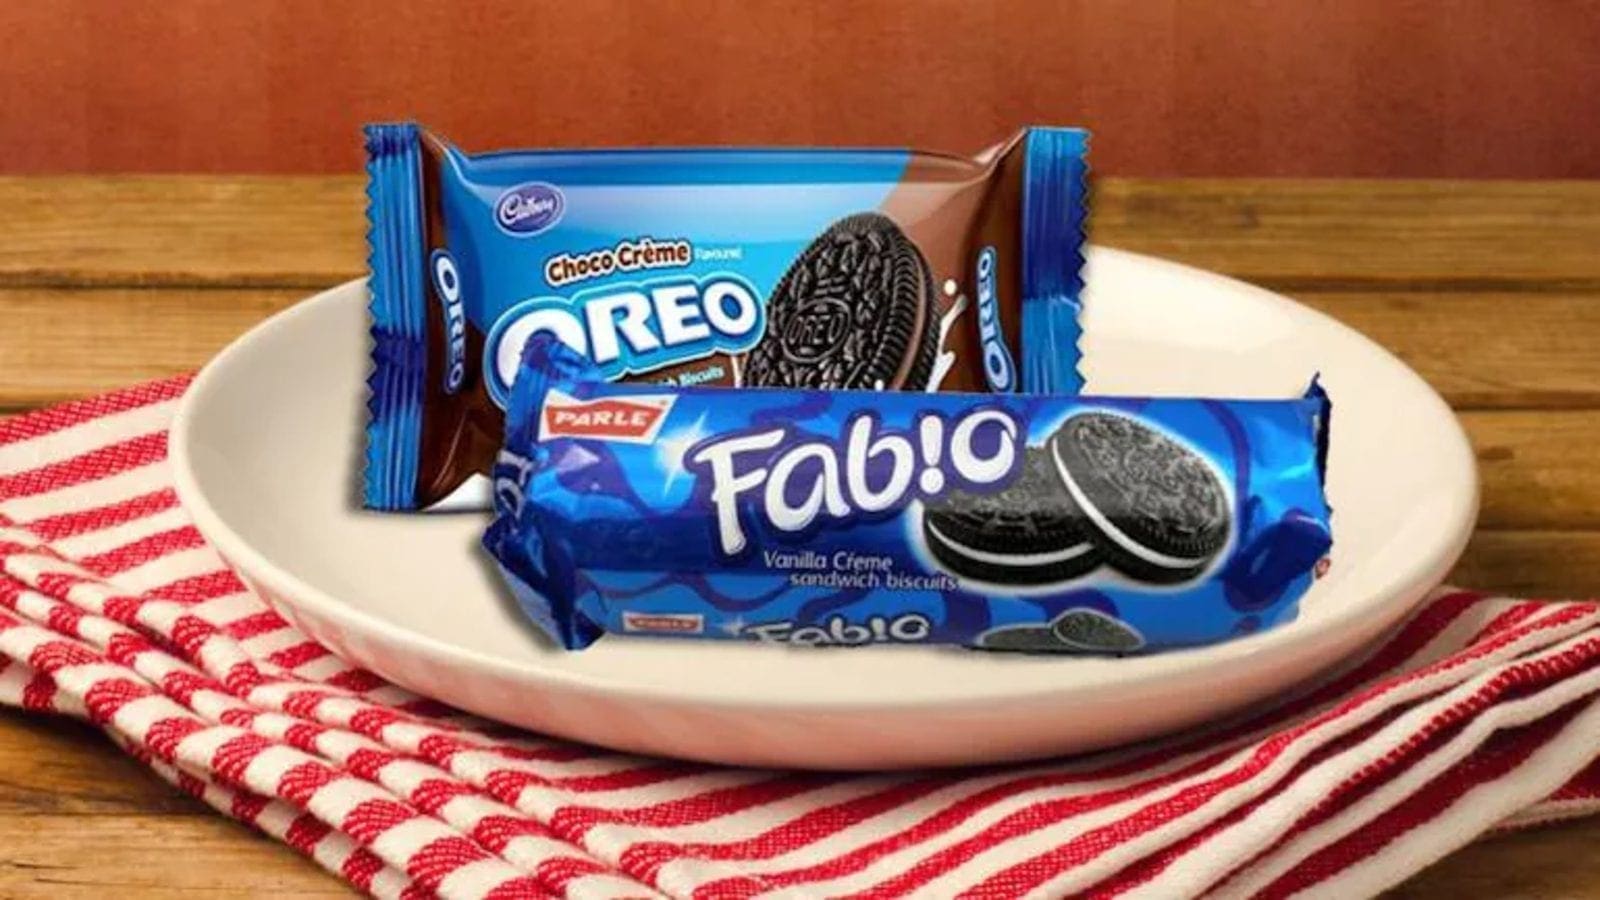 Mondelēz snack unit takes Parle to court for ‘copying’ design of Oreo cookie